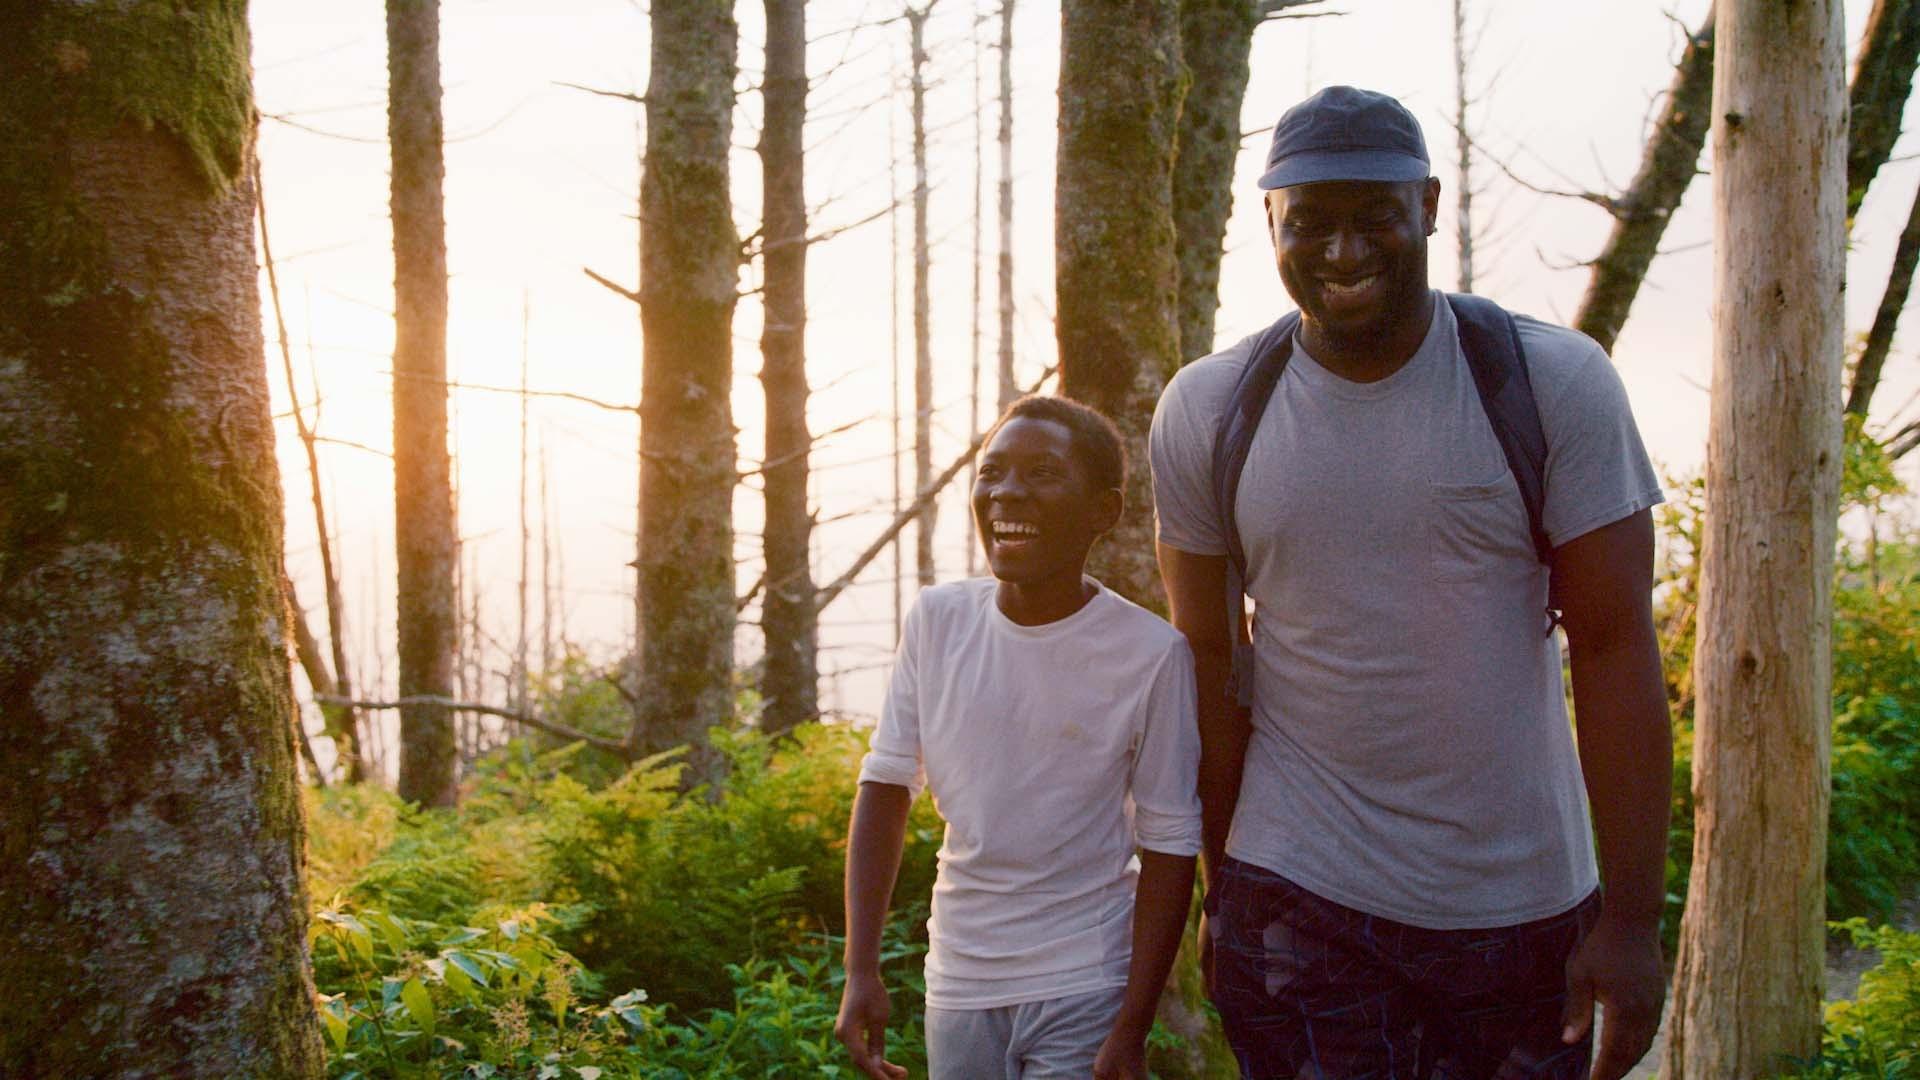 A father and son hike through the woods in a North Carolina state park